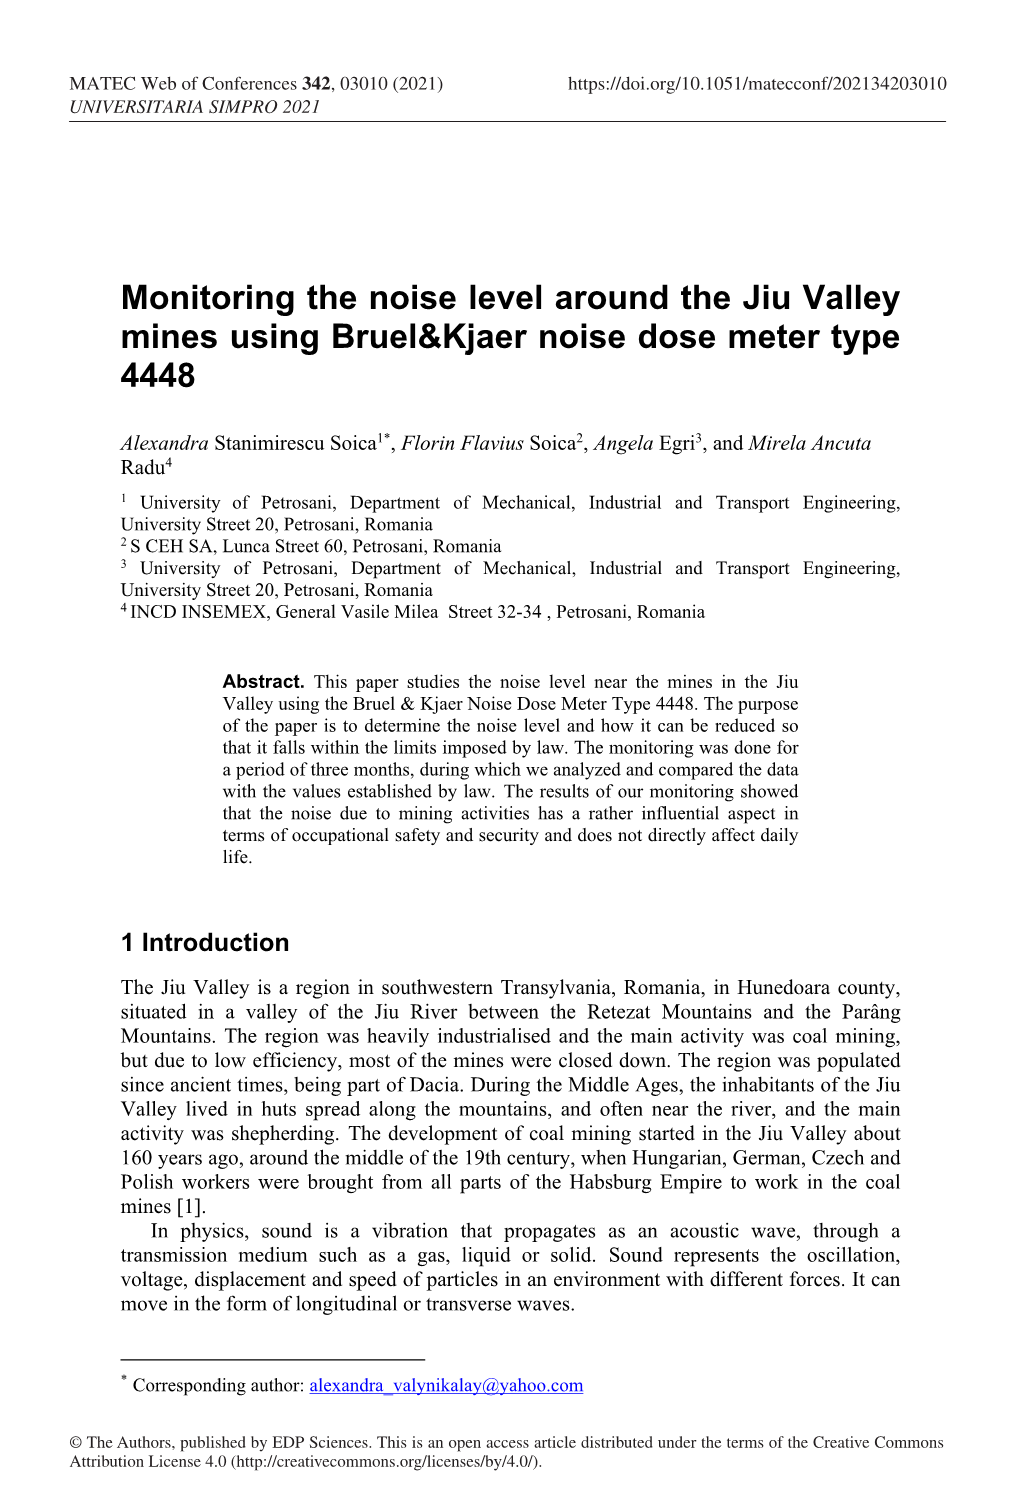 Monitoring the Noise Level Around the Jiu Valley Mines Using Bruel&Kjaer Noise Dose Meter Type 4448